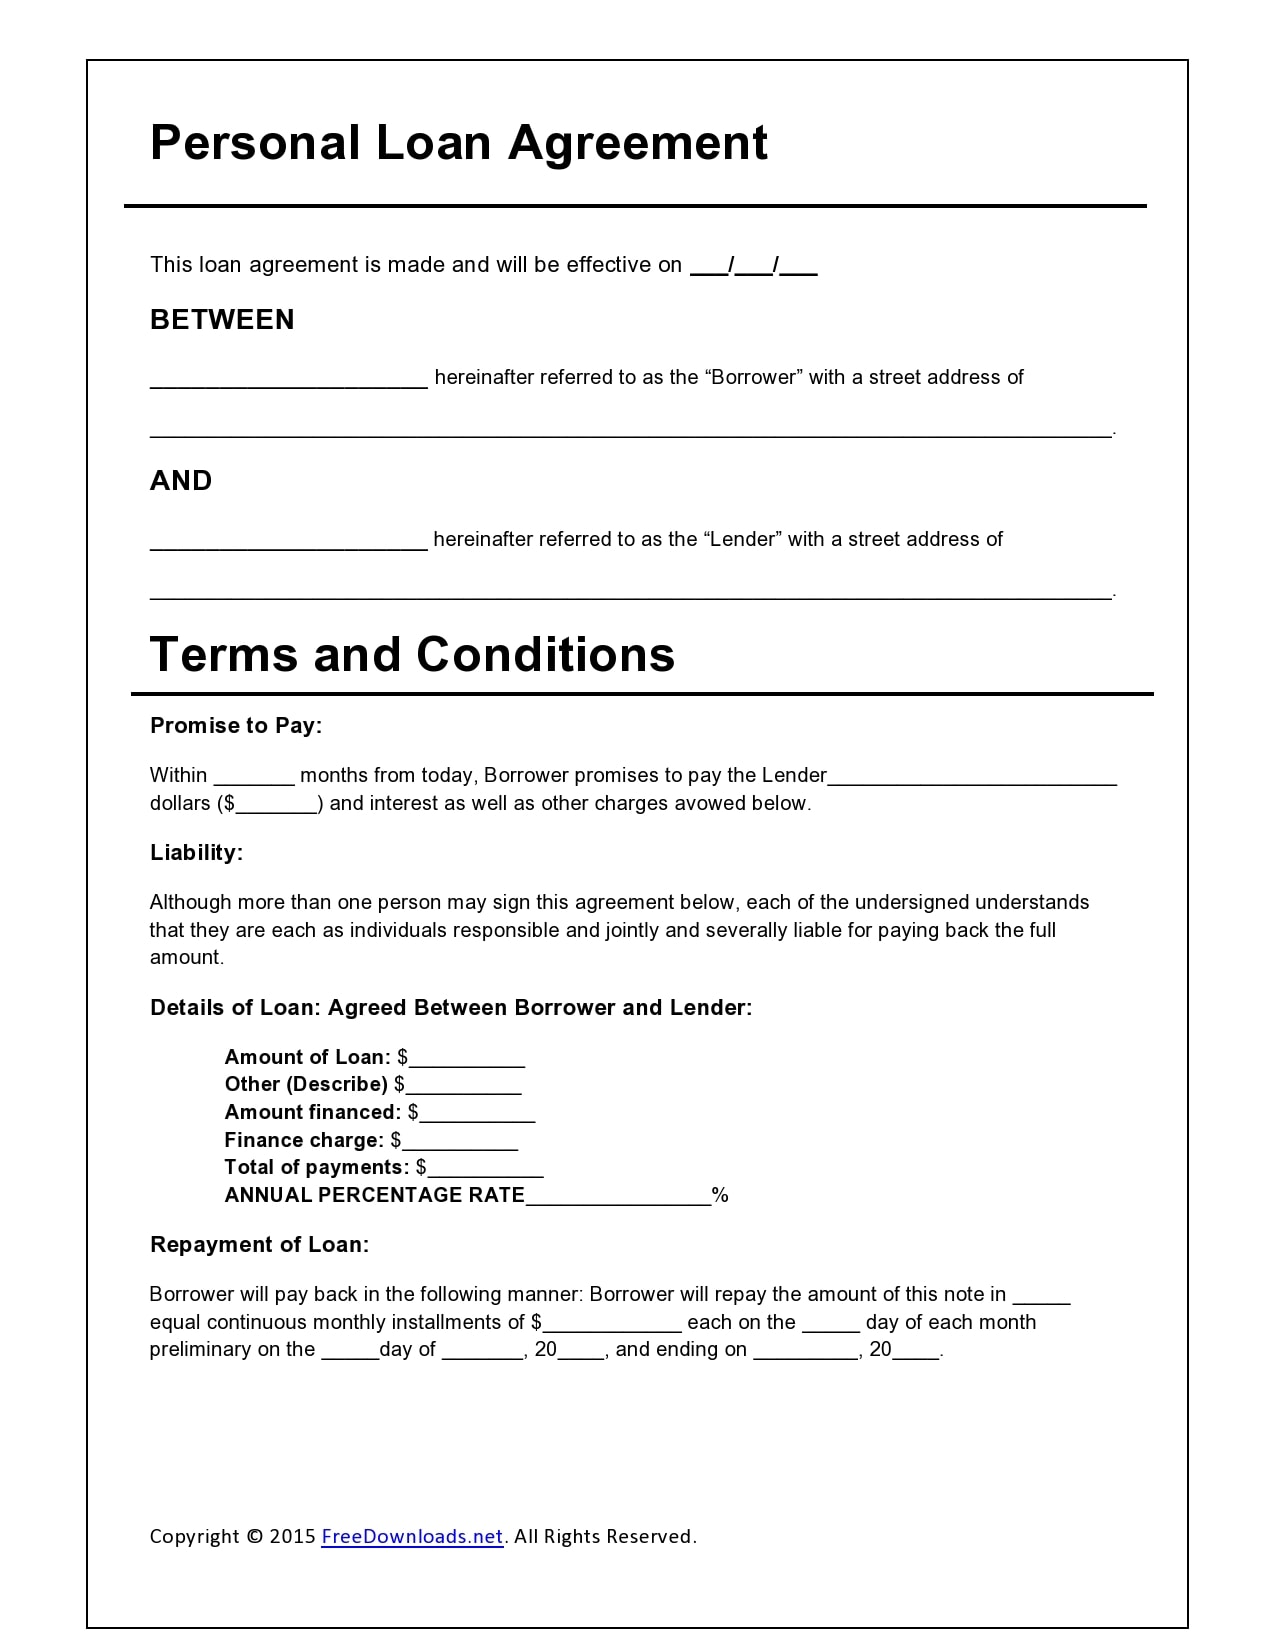 22 Simple Family Loan Agreement Templates (22% Free) With private loan agreement template free